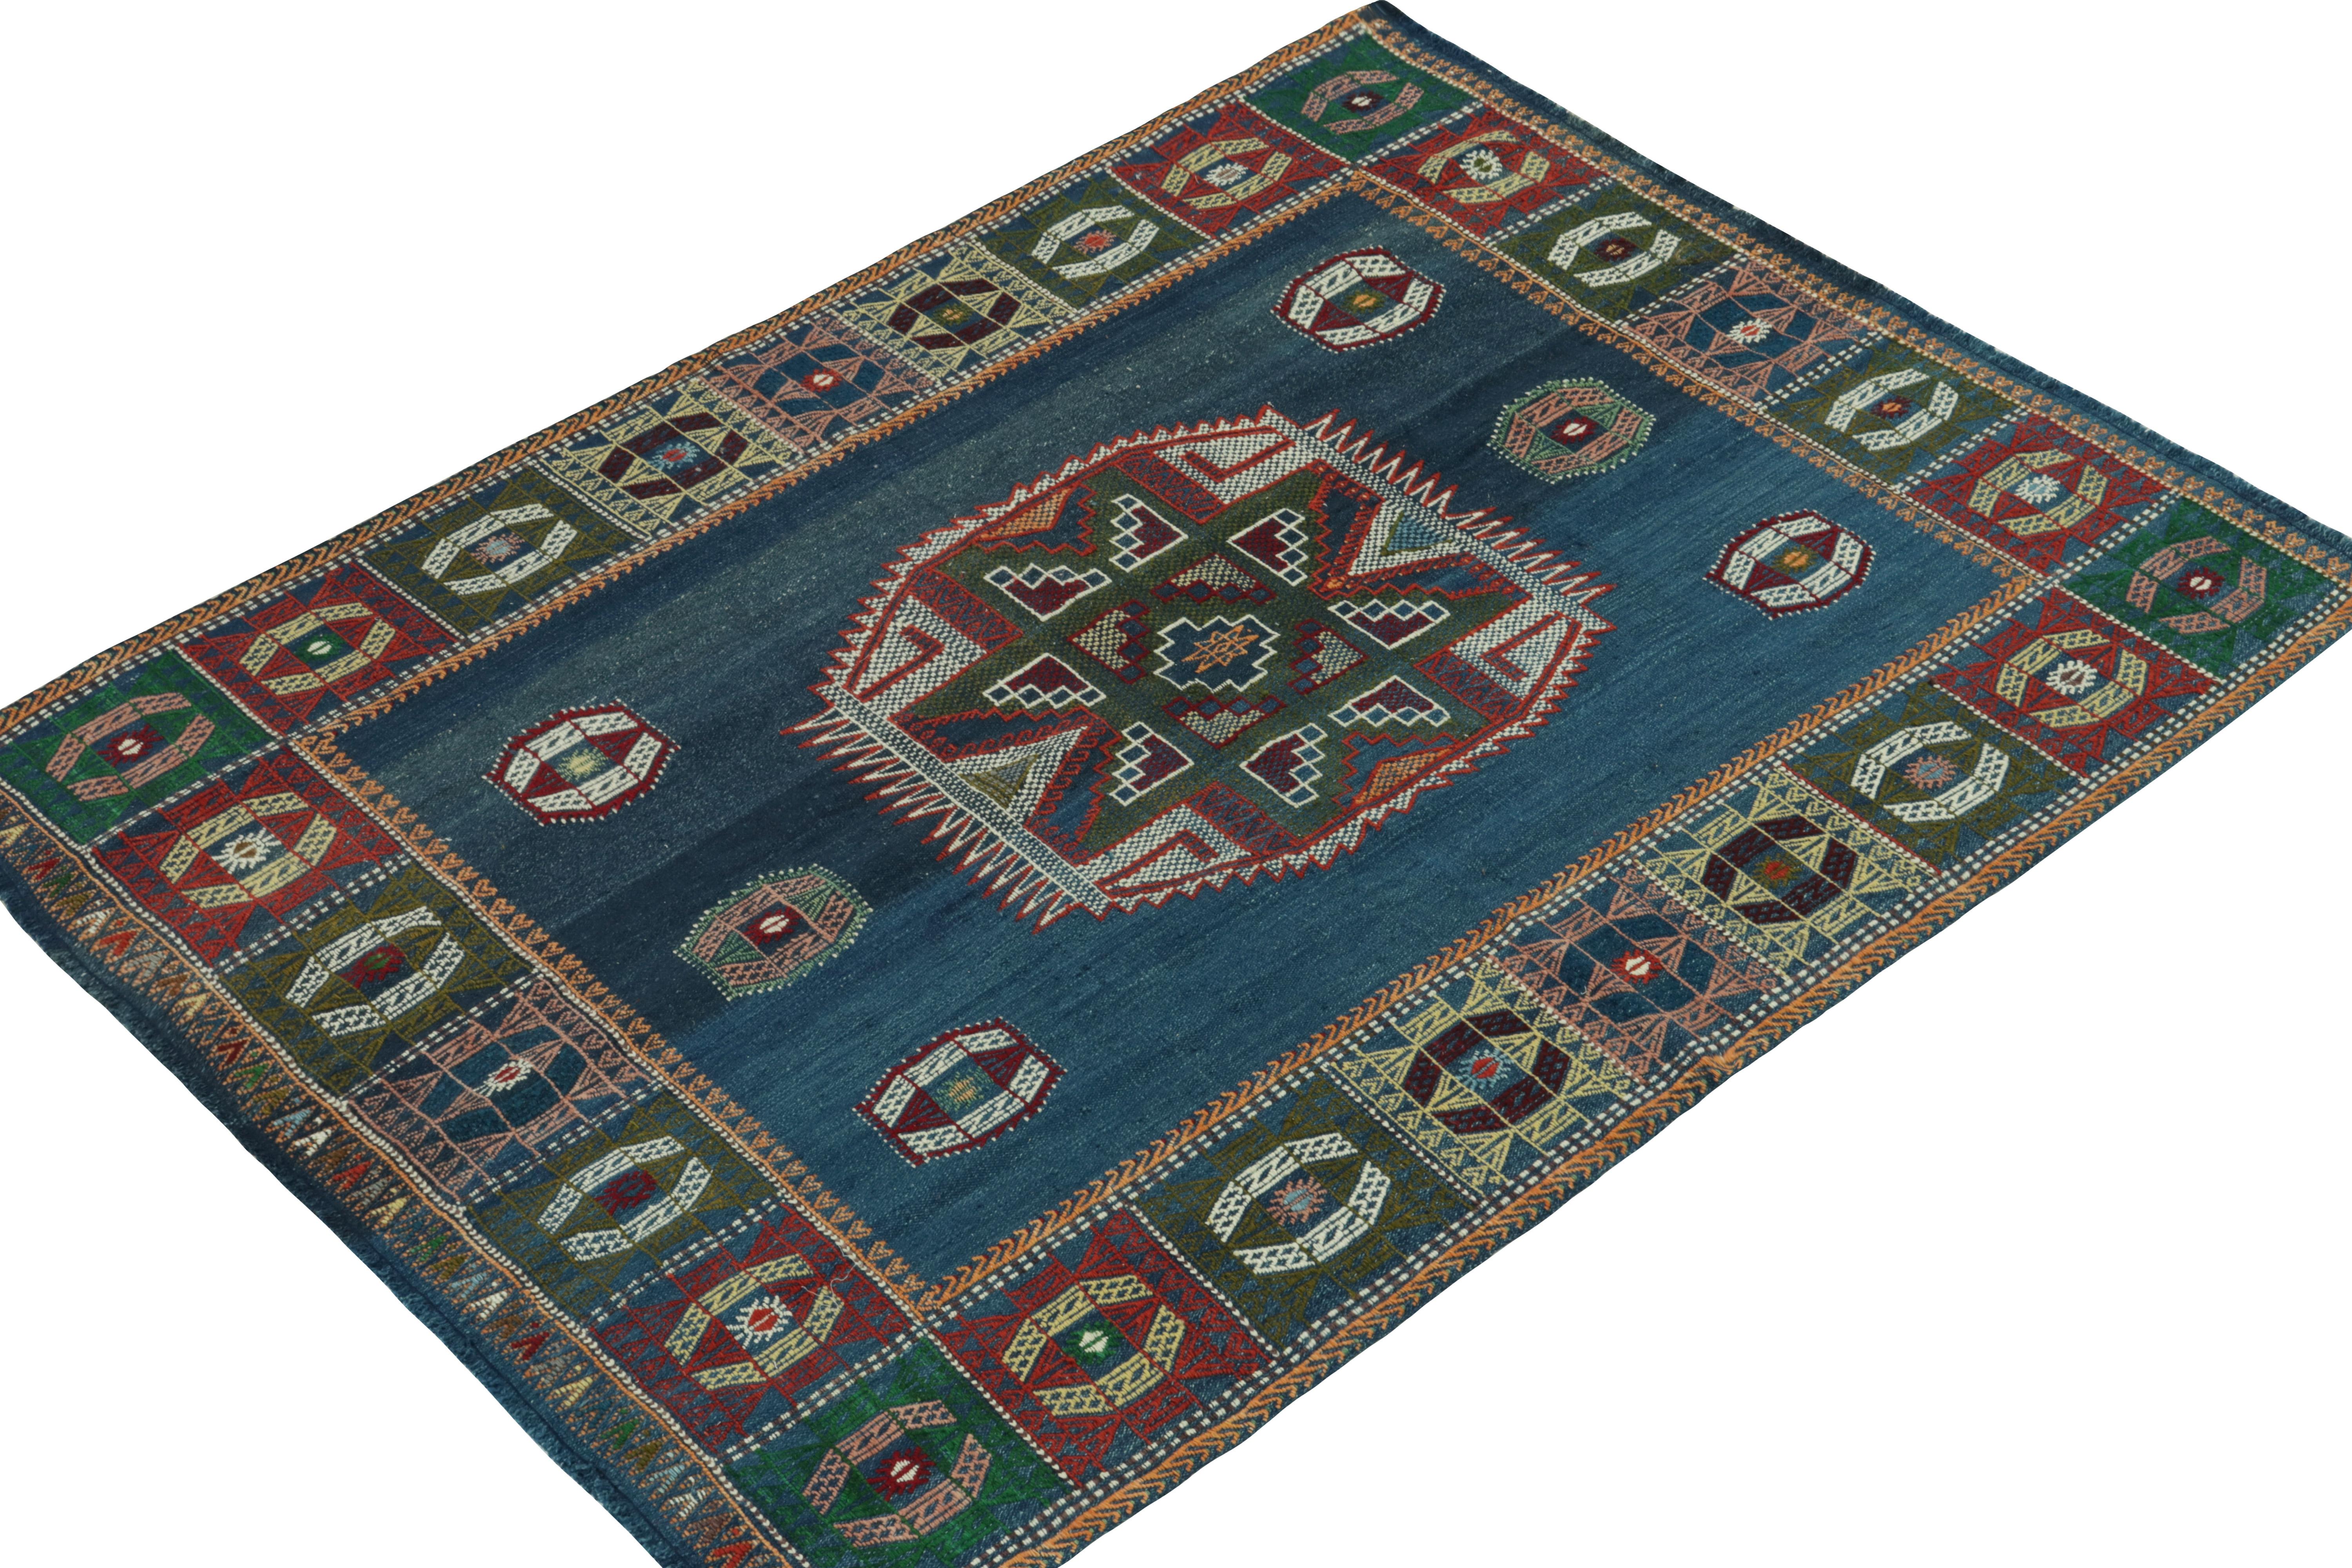 This vintage 5x6 tribal Kilim originates from Turkey circa 1950-1960. 

Handwoven in wool, its design favors medallion patterns in an open field and border with finely detailed squares. Keen eyes will note an embroidered texture in the patterns,